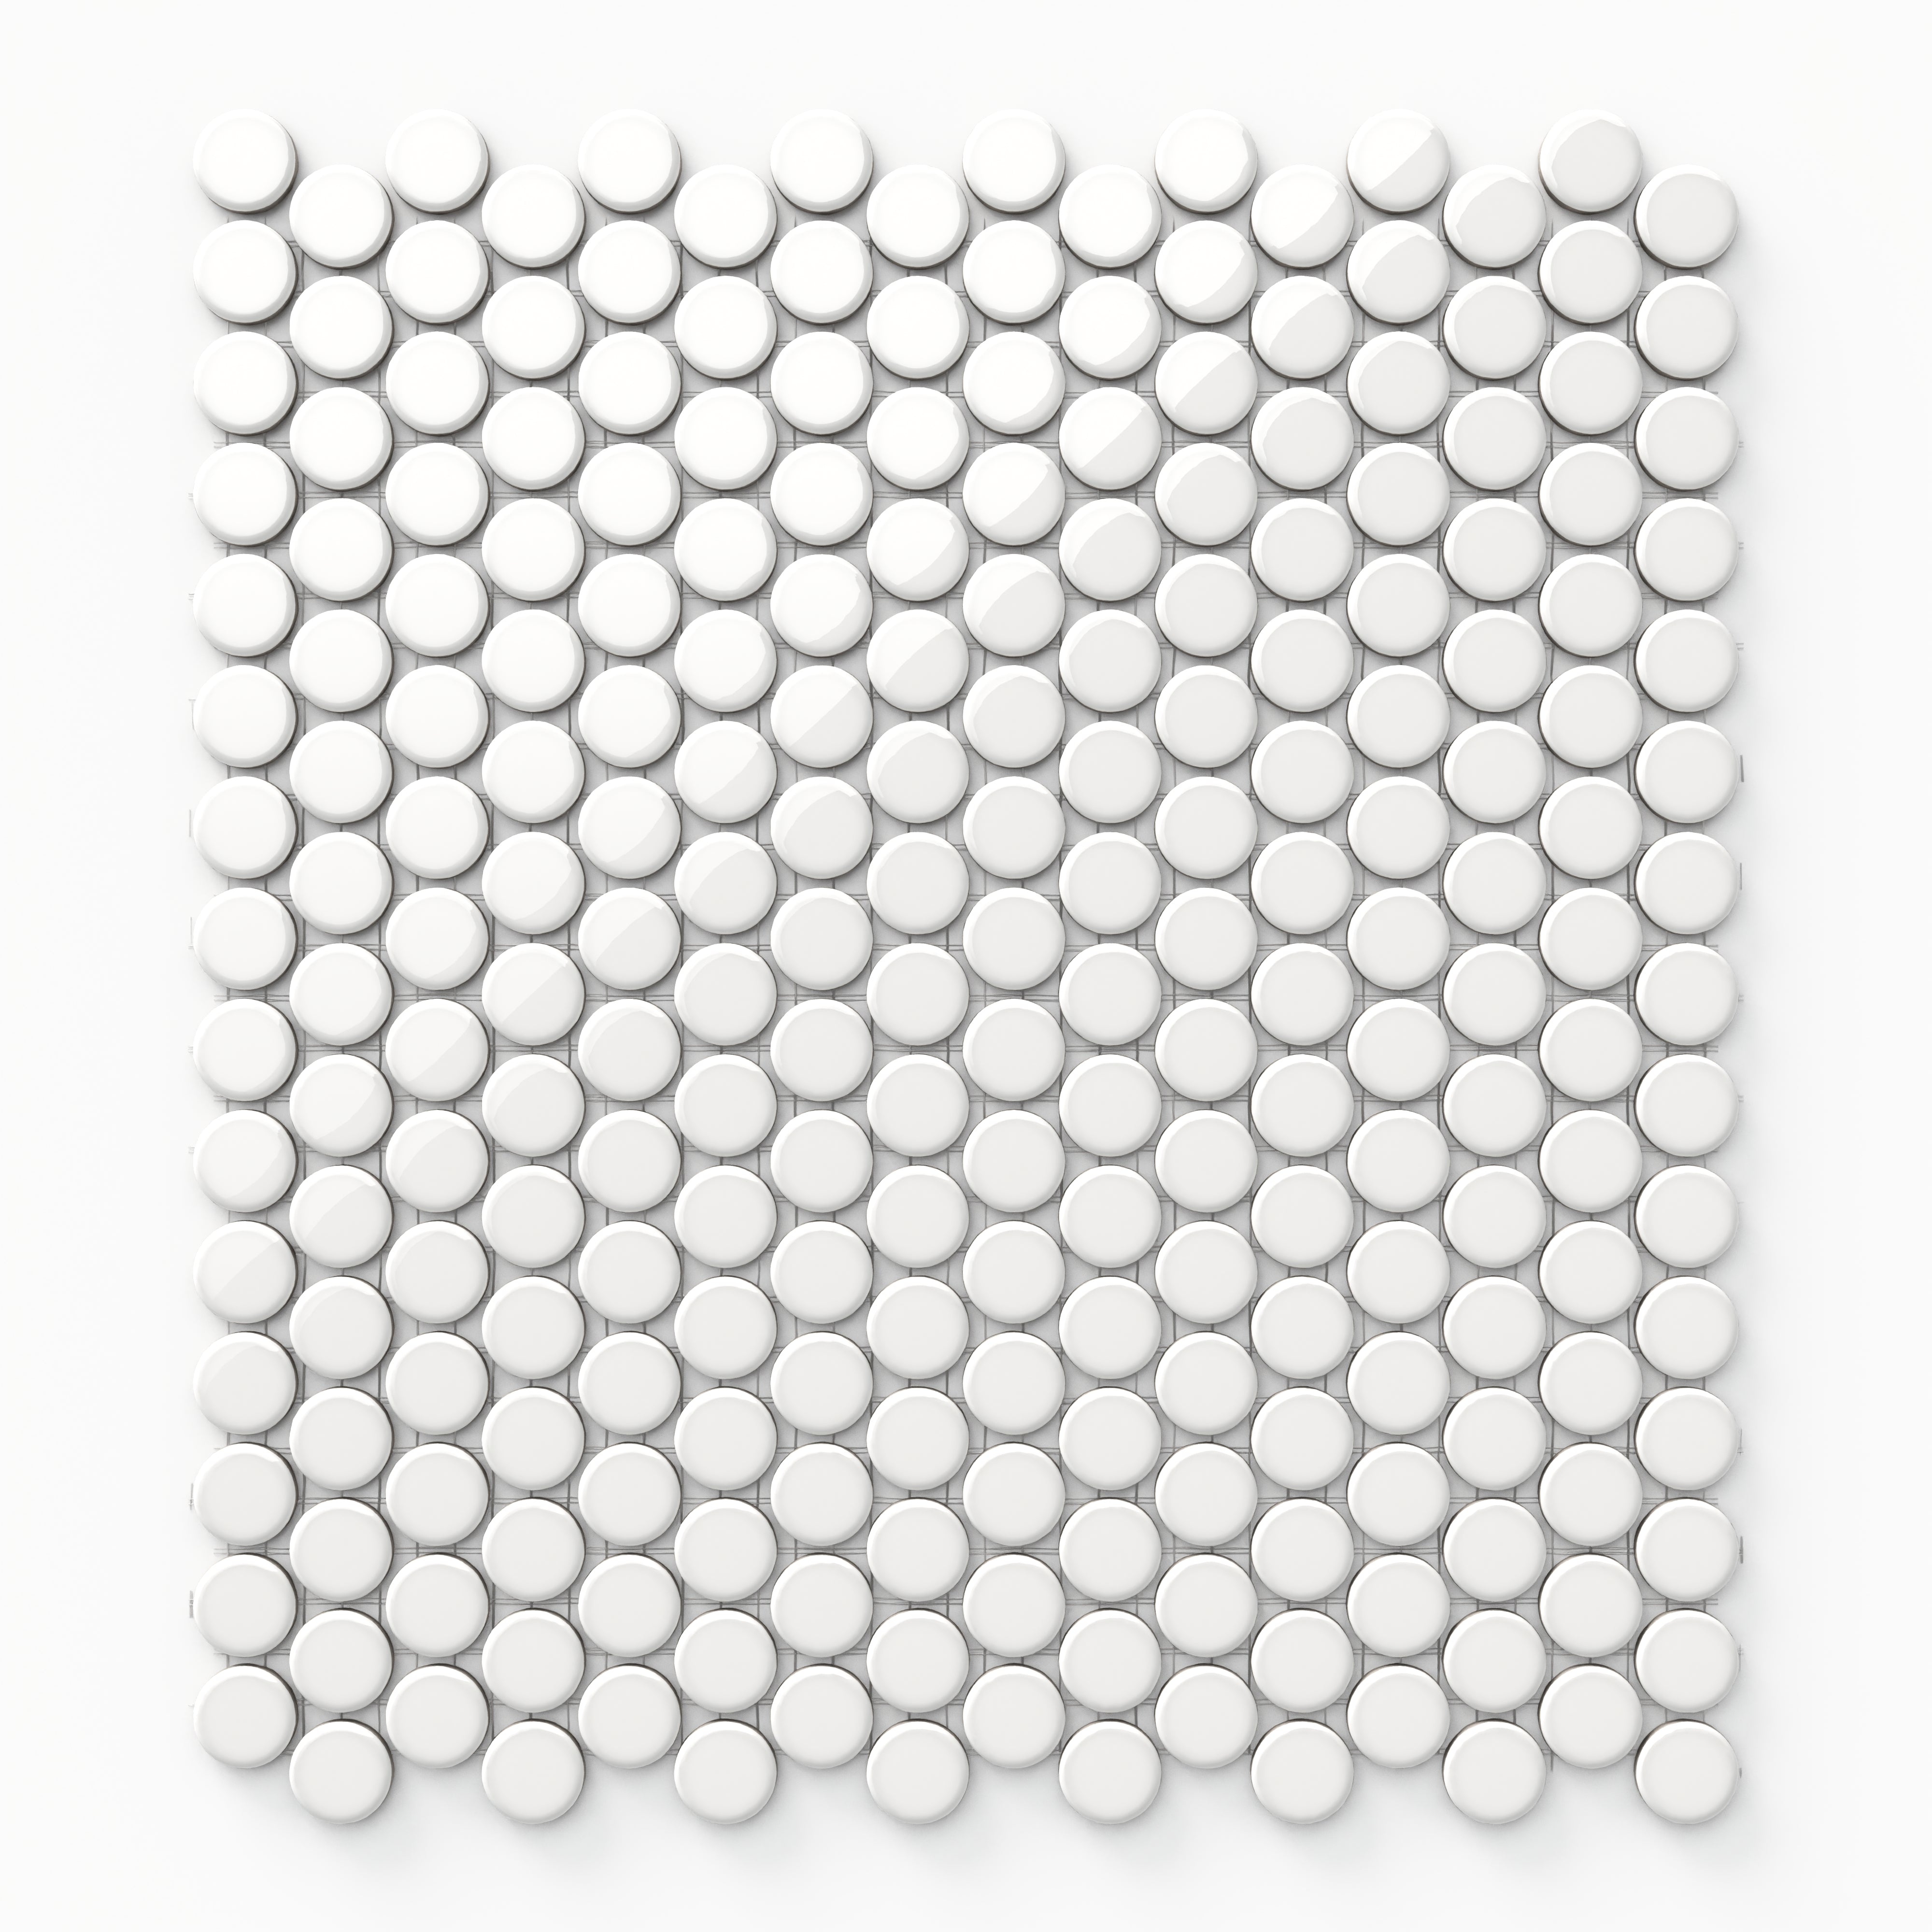 Ollie 3/4x3/4 Glossy Porcelain Mosaic Penny Round Tile in White